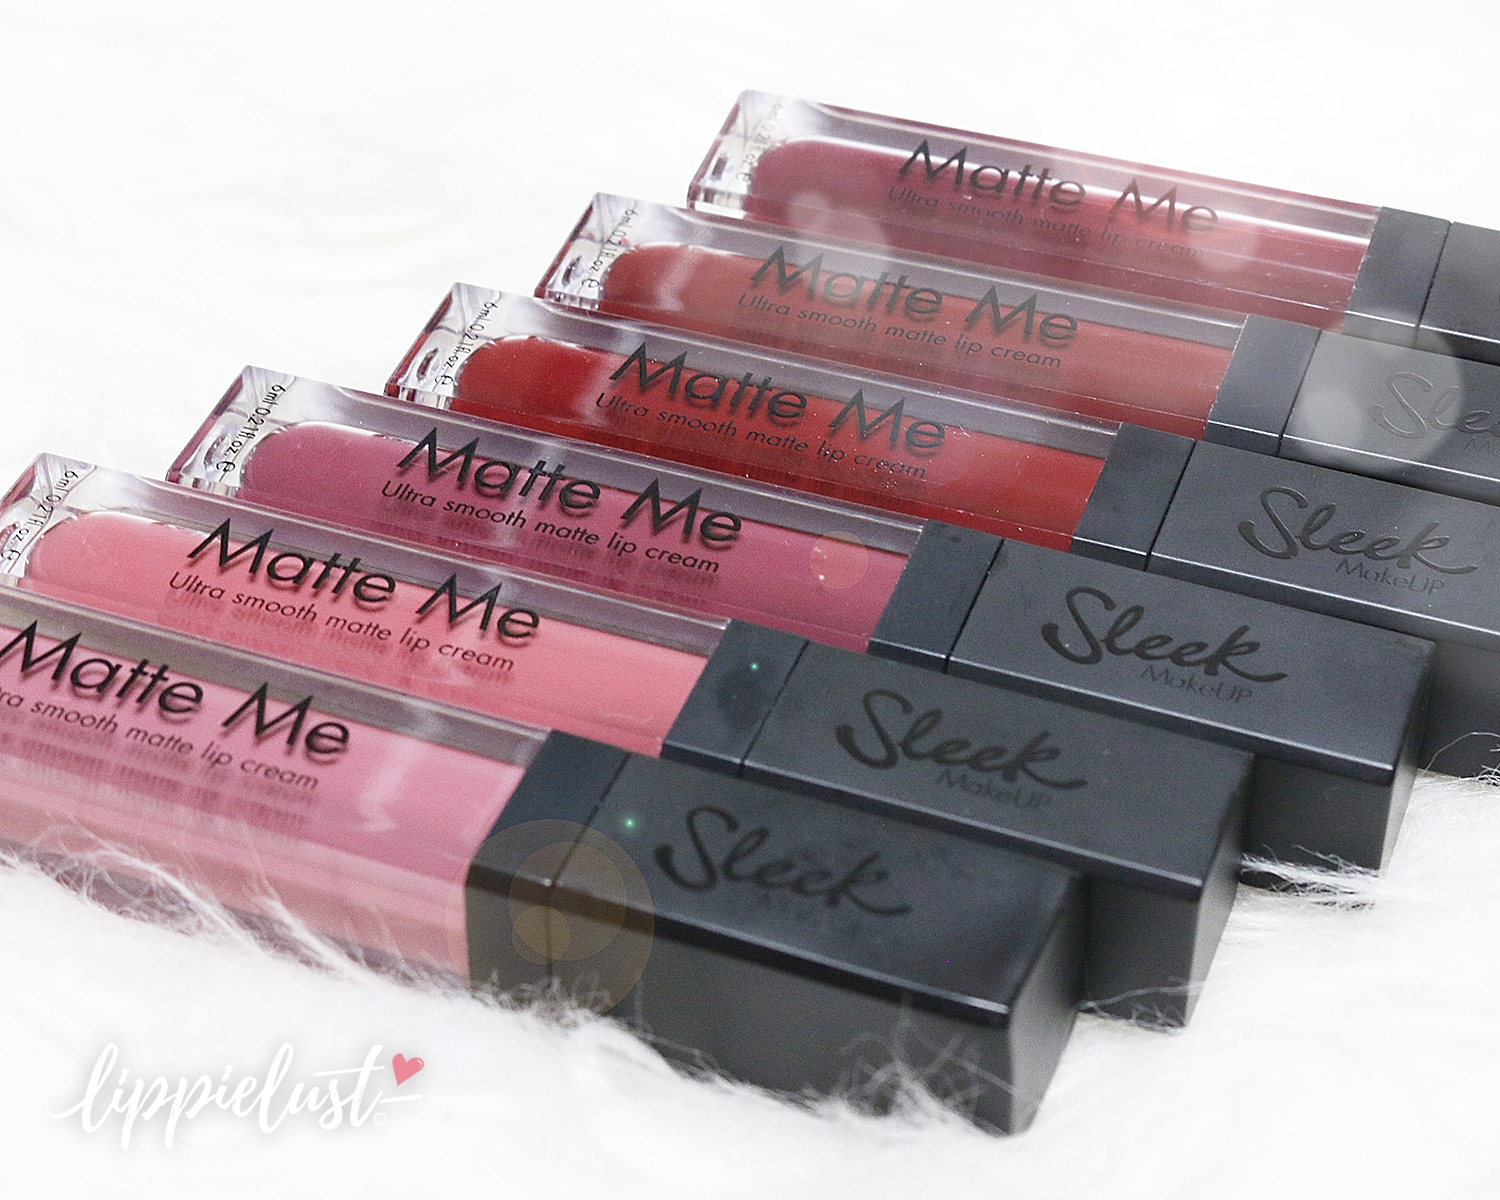 Swatches & Review] Sleek Matte Me New